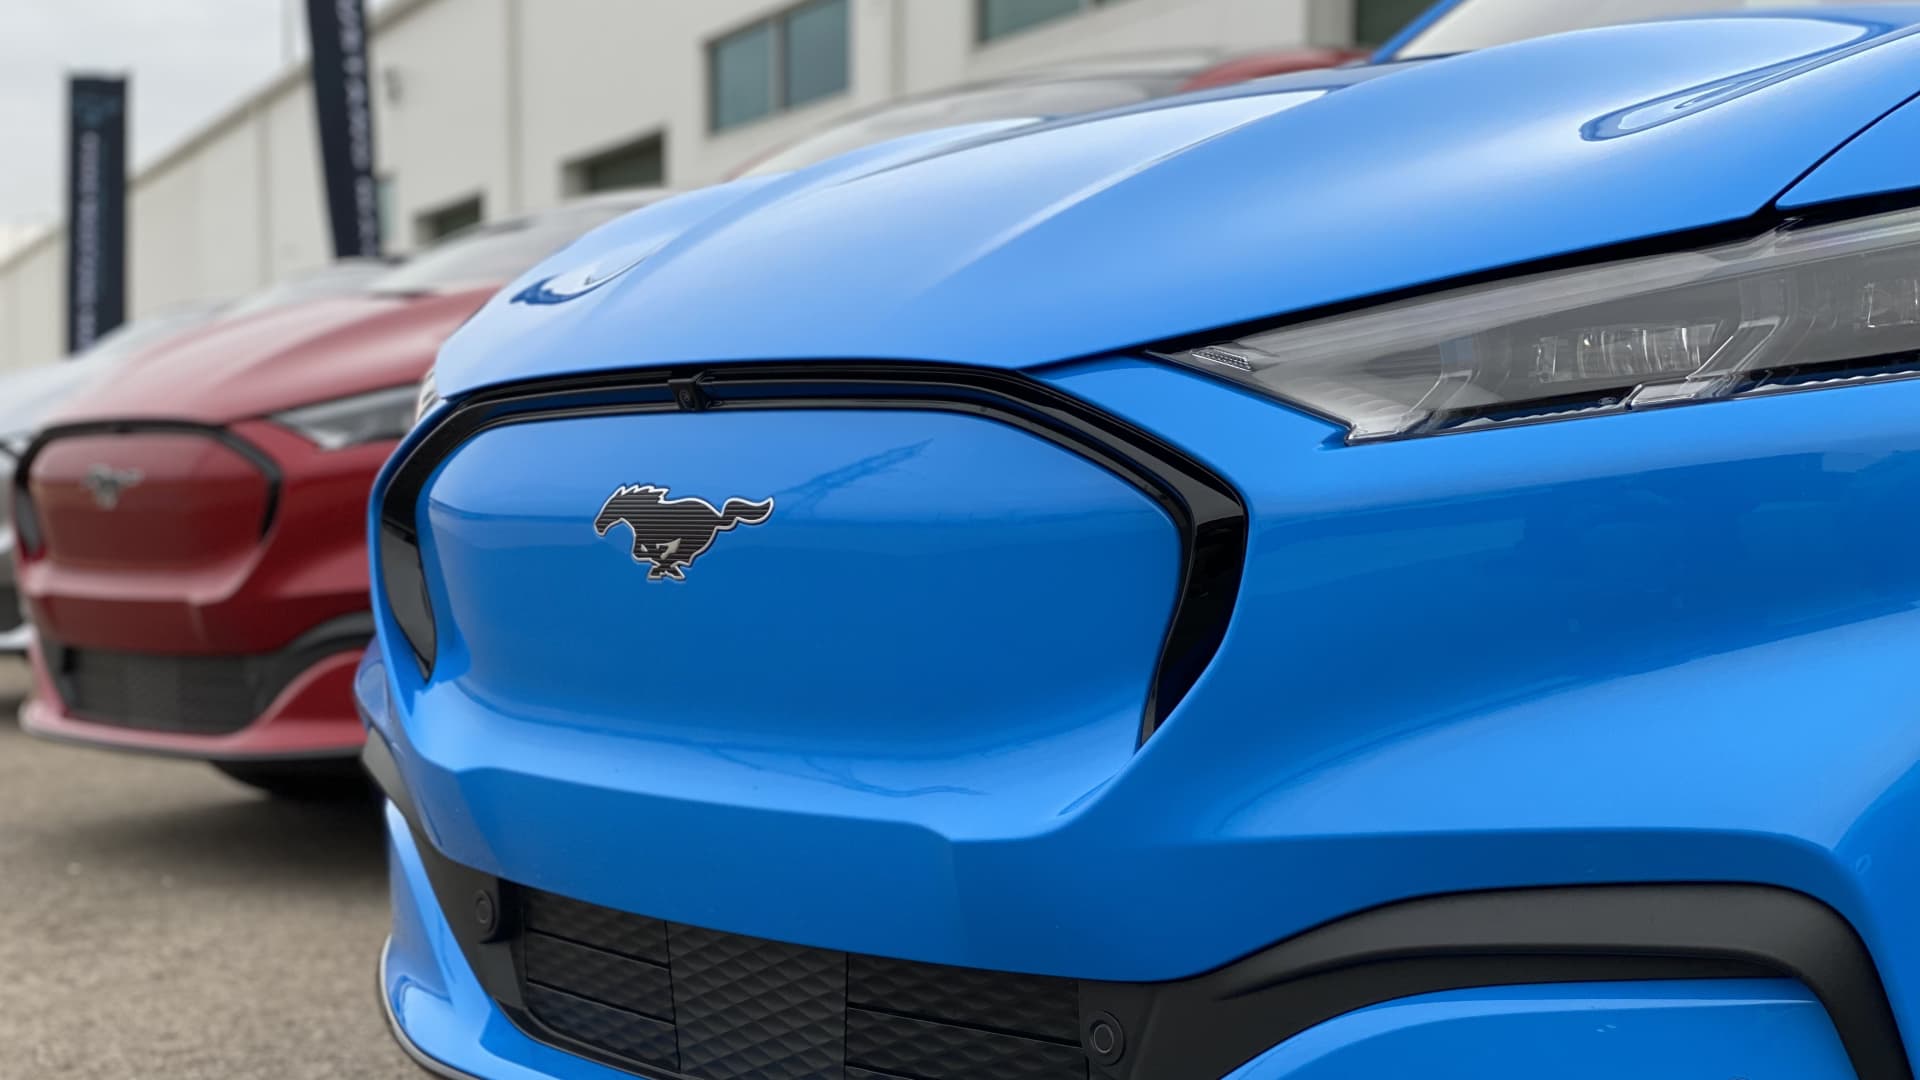 The Mustang Mach-E is Ford's first new all-electric vehicle under an $11 billion investment plan in electrified vehicles through 2022.